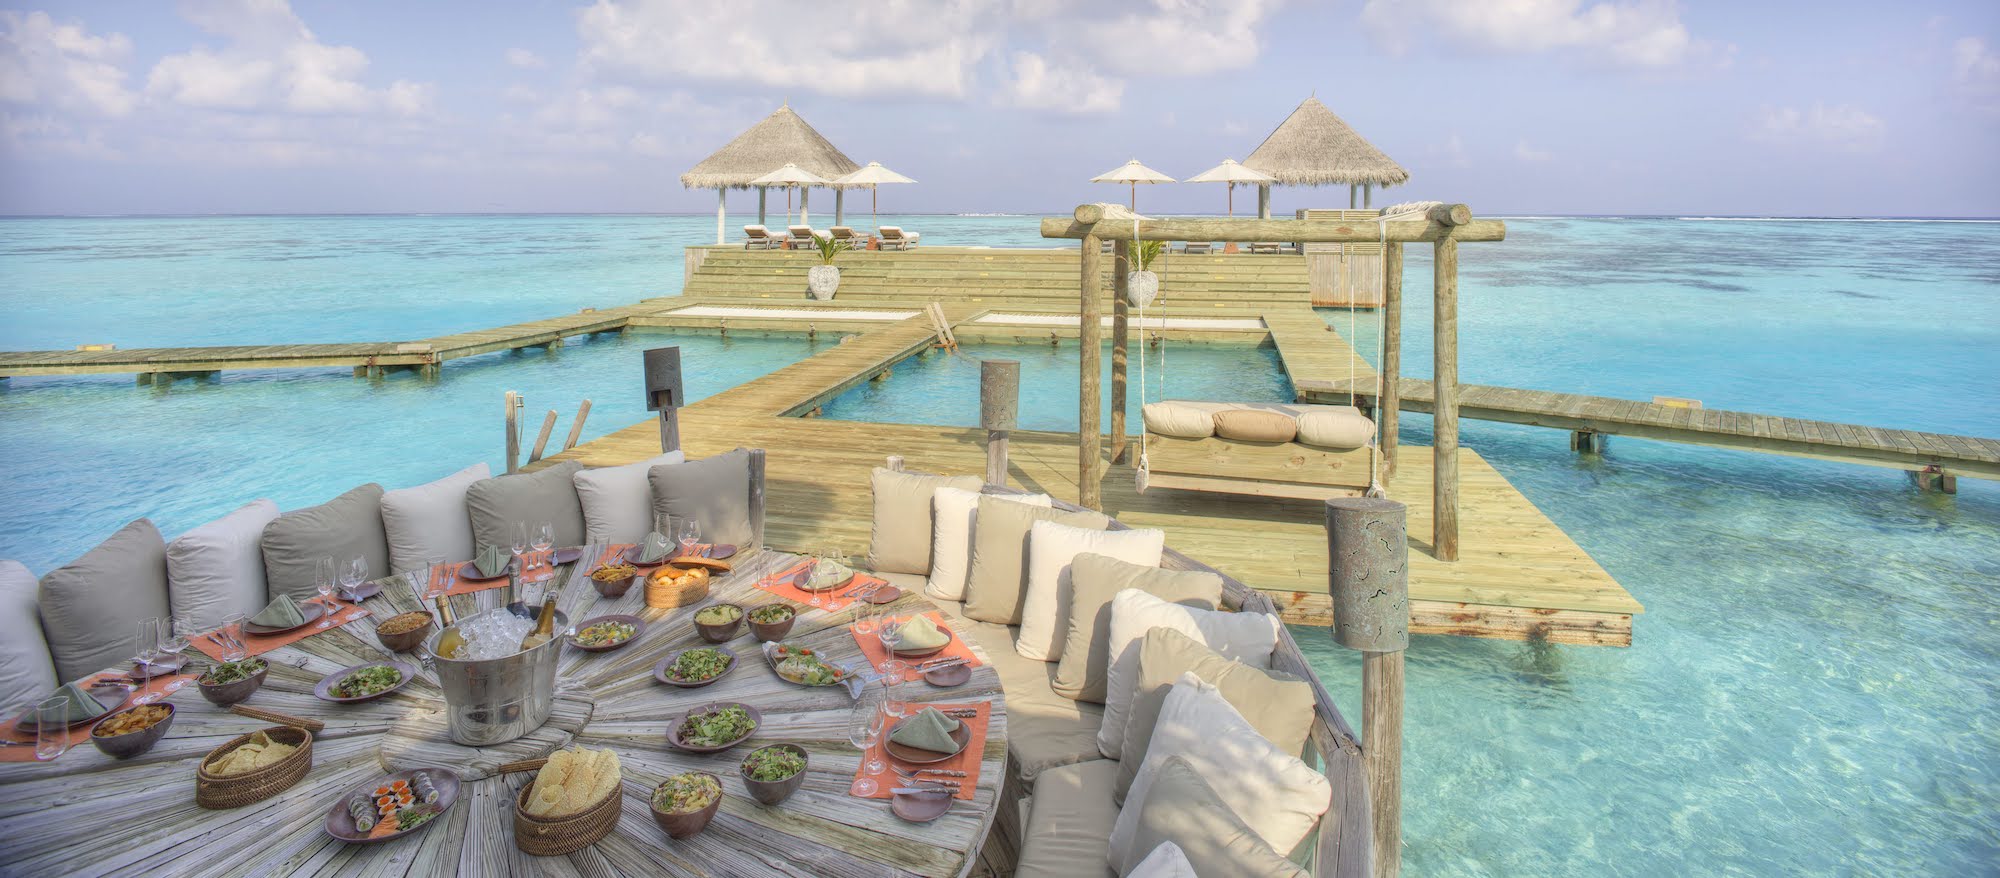 The five buildings of the Private Reserve villa at Gili Lankanfushi are only accessible by boat